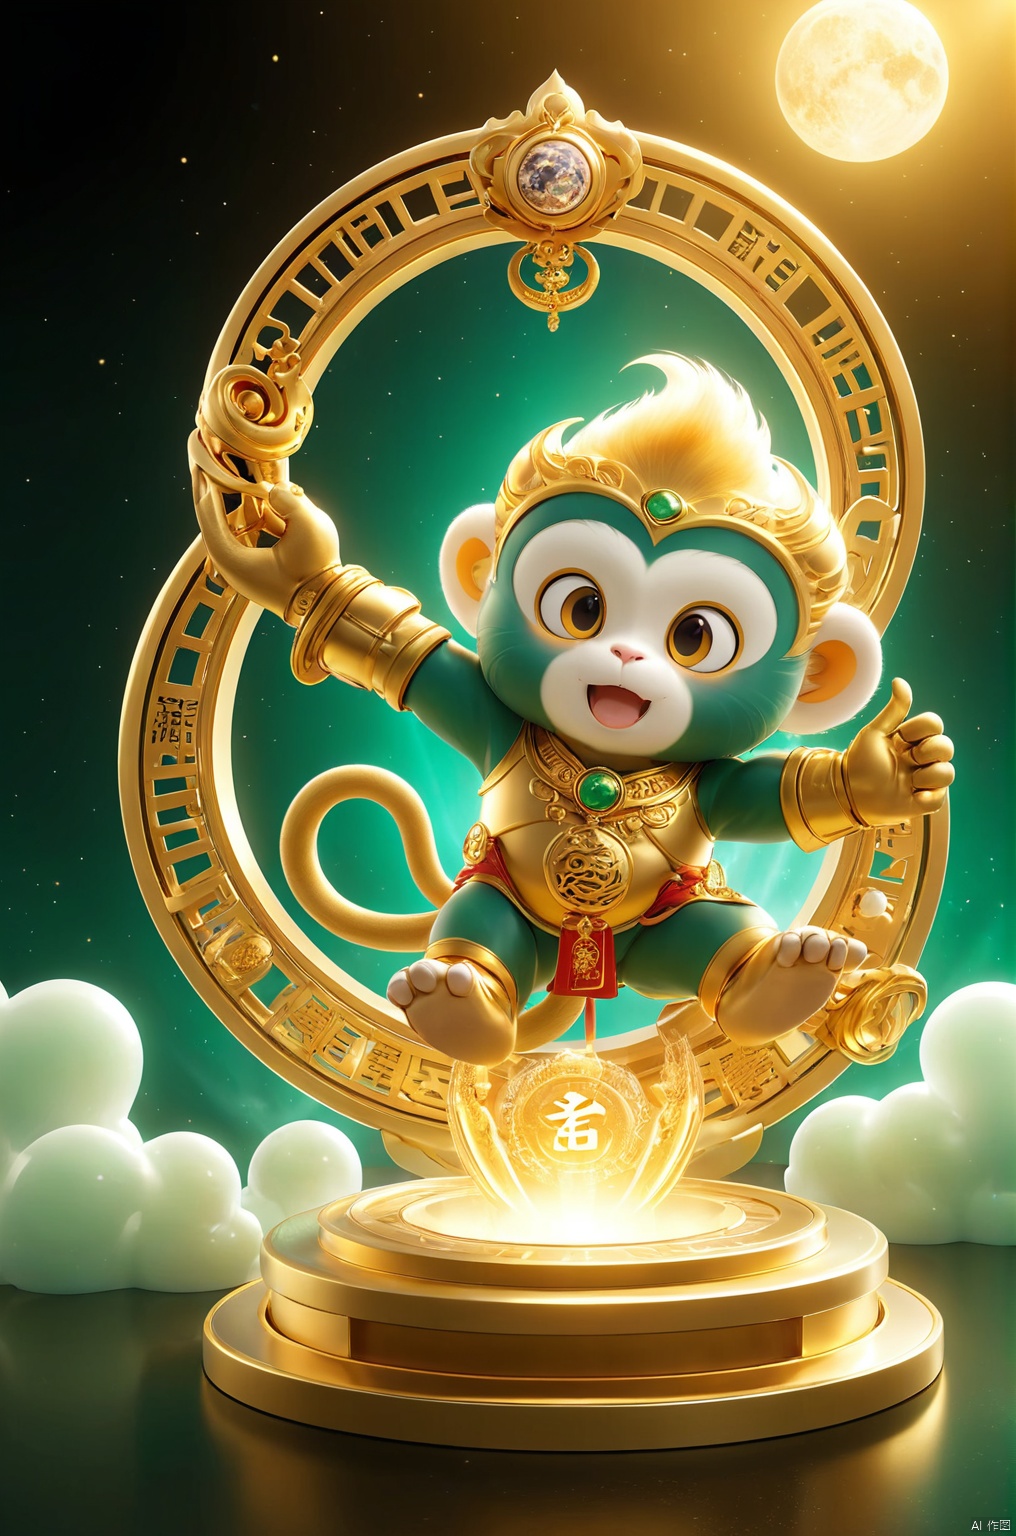  3D_style
The golden monkey rises with a thousand-catty rod, and the jade universe clears up ten thousand miles of dust.

professional 3d model, anime artwork pixar, 3d style, good shine, OC rendering, highly detailed, volumetric, dramatic lighting,